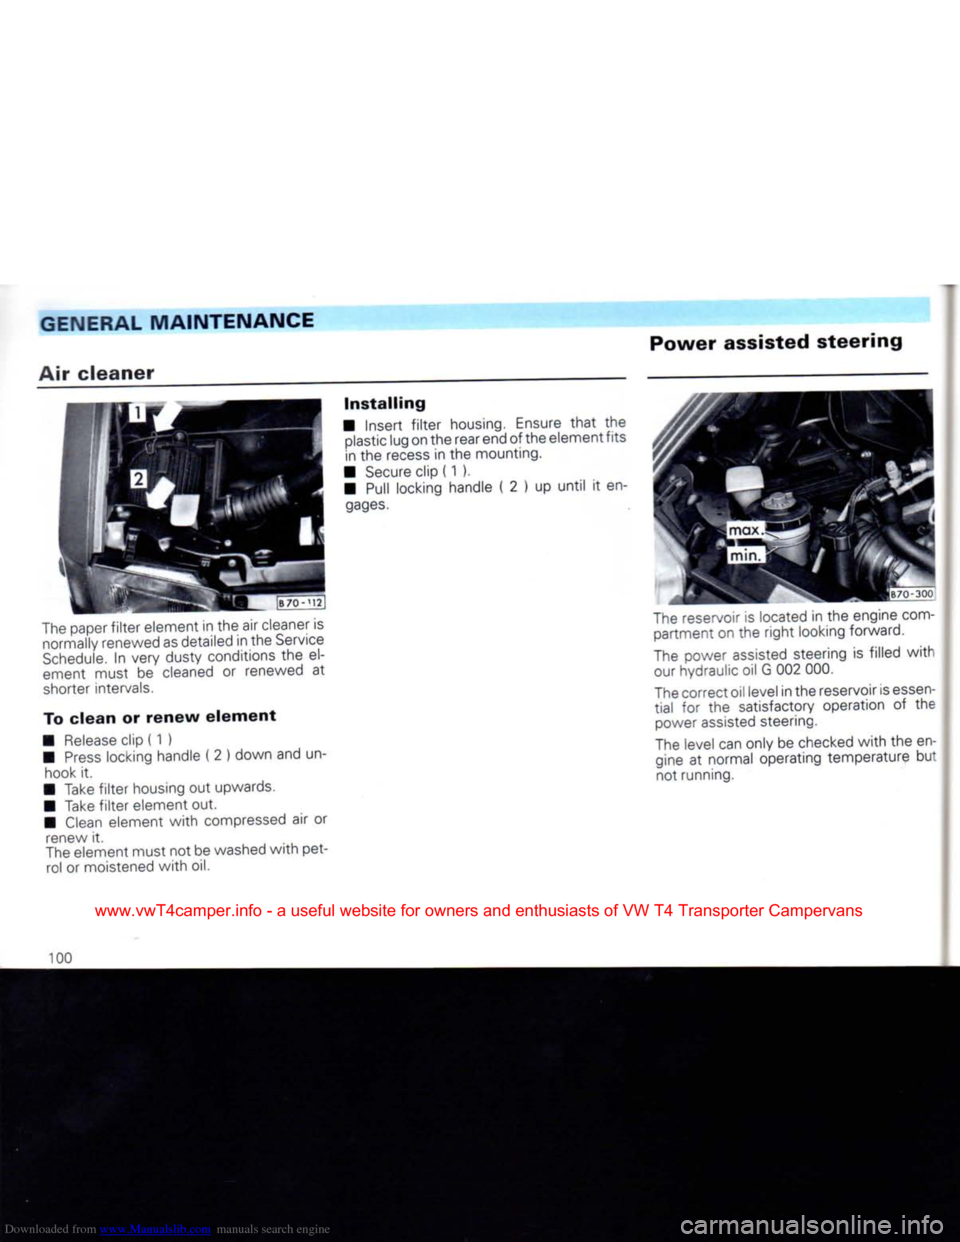 VOLKSWAGEN CARAVELLE 1992 T4 / 4.G Owners Manual Downloaded from www.Manualslib.com manuals search engine 
GENERAL
 MAINTENANCE 
Air
 cleaner 
 Power
 assisted
 steering 

The
 paper
 filter
 element in the air cleaner is  normally renewed as detail